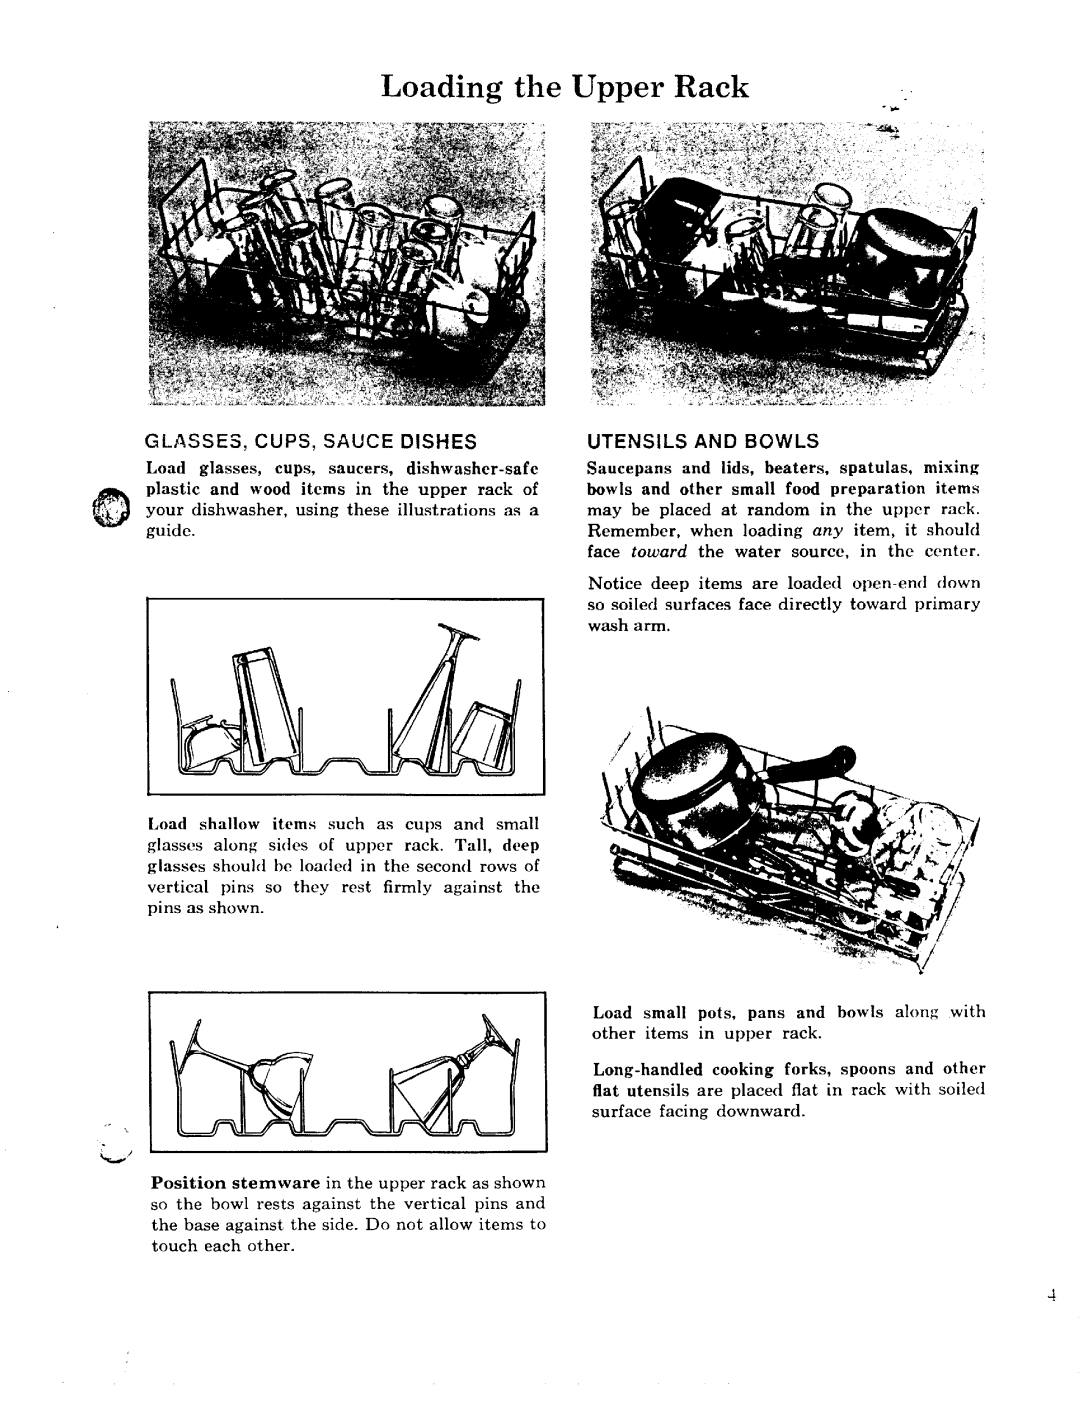 GE 49-5301-1 manual Loading the, Upper ltack, your dishwasher, using these illustrations as a, pins as shown, wash arm 